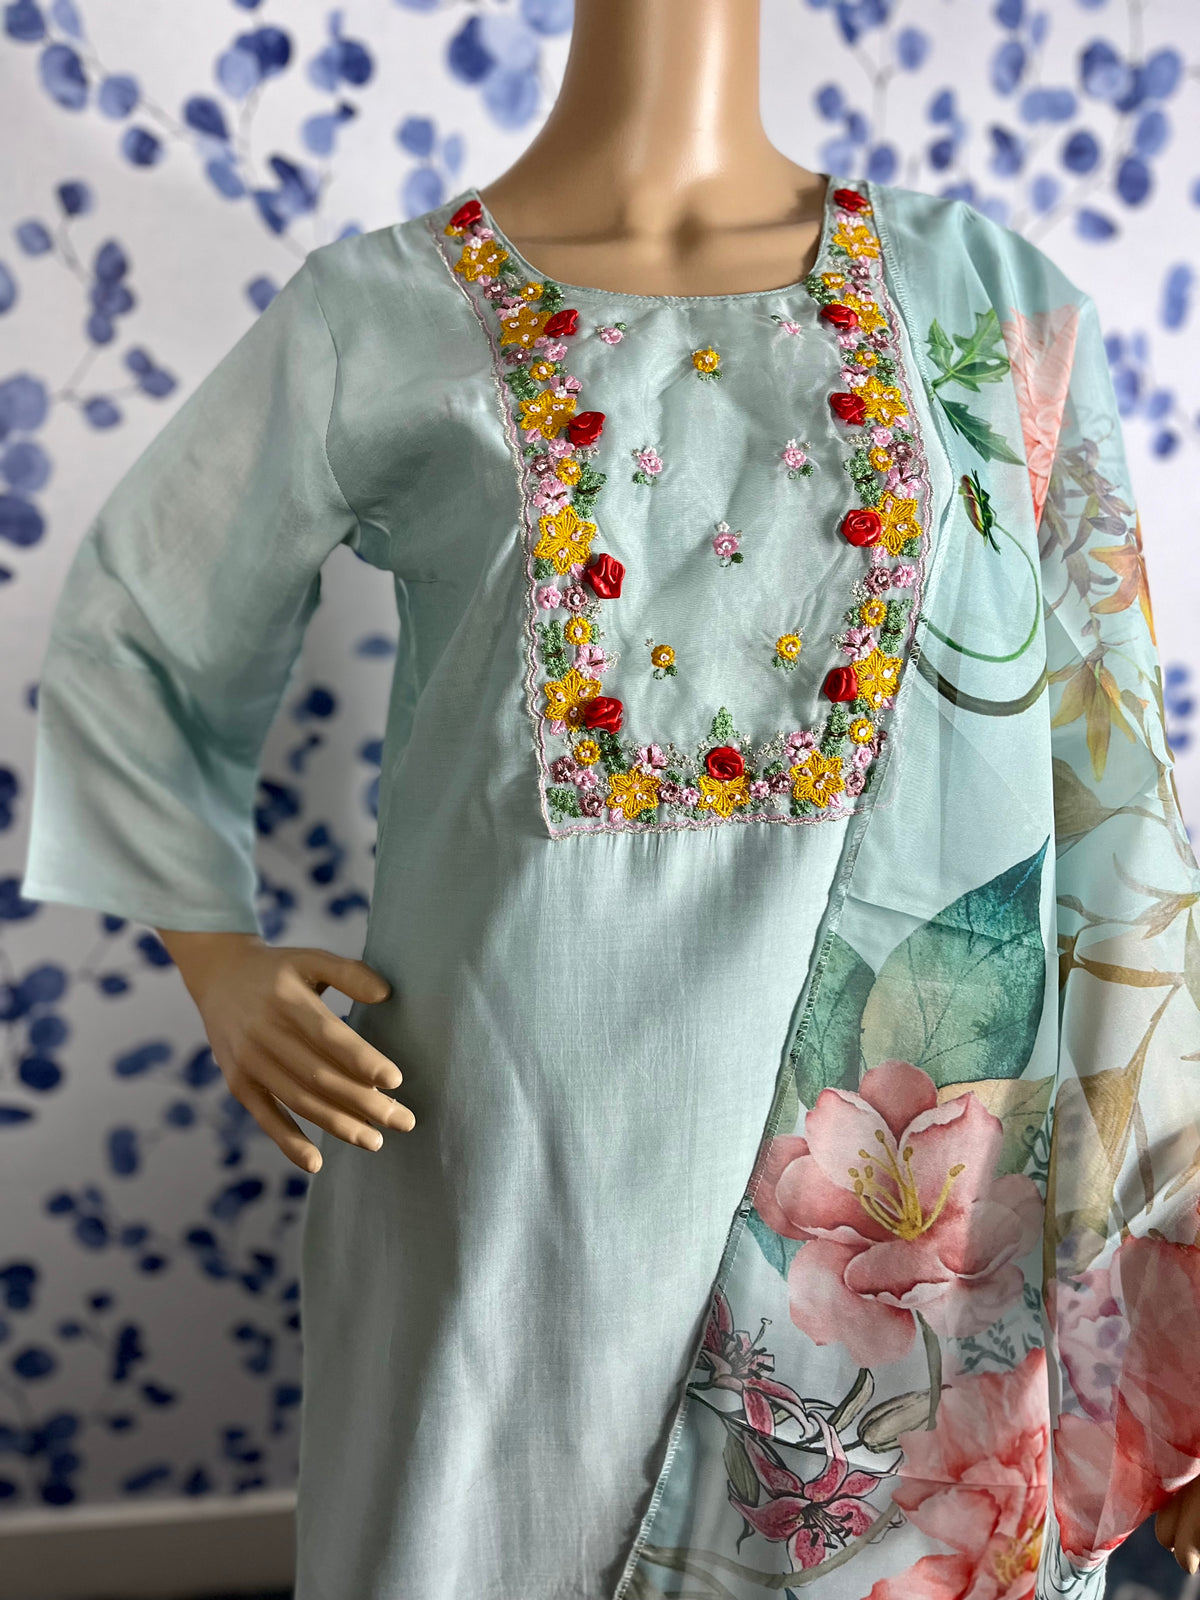 STK374-Roman Silk Kantha Handwork Neckline Embroidery and at Ghera with Orgenza digital Printed Dupatta with Roman Pants(Color: Light Pistachio Green)